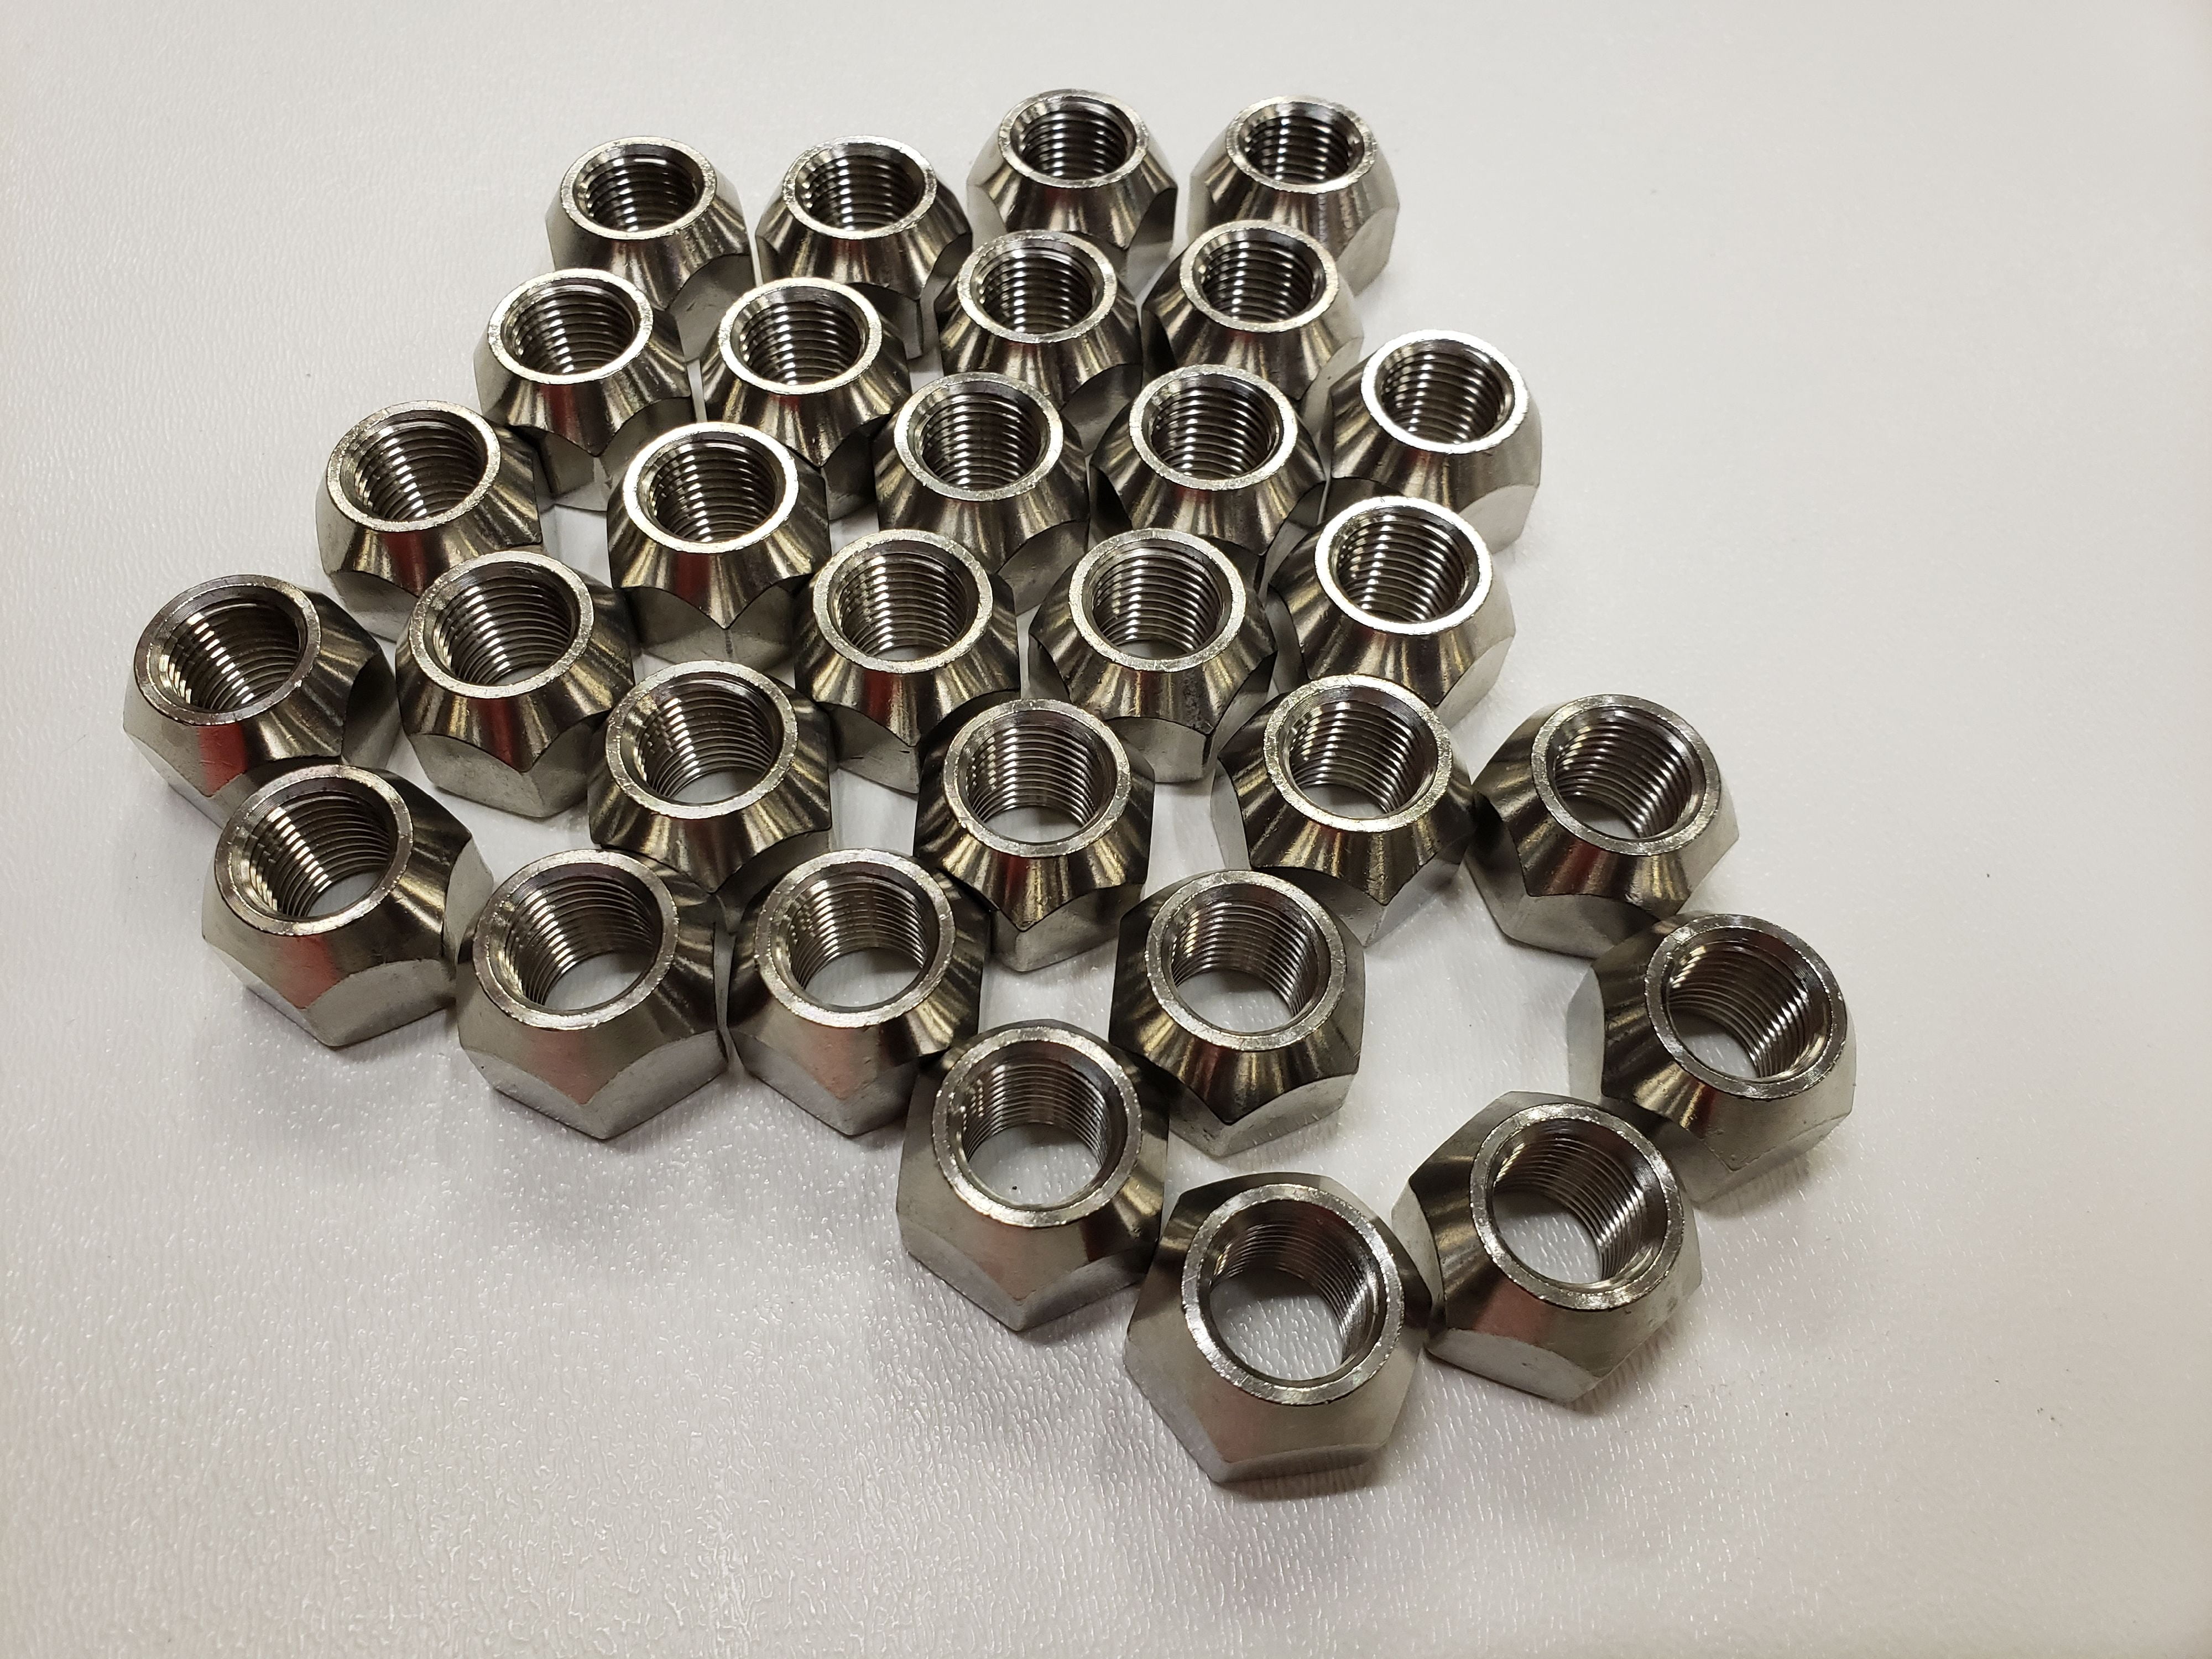 Thirty (30) Pack Open 304 Stainless Steel 1/2-20 Lug Nuts For Trailer Stainless Steel Lug Nuts 1 2 X 20